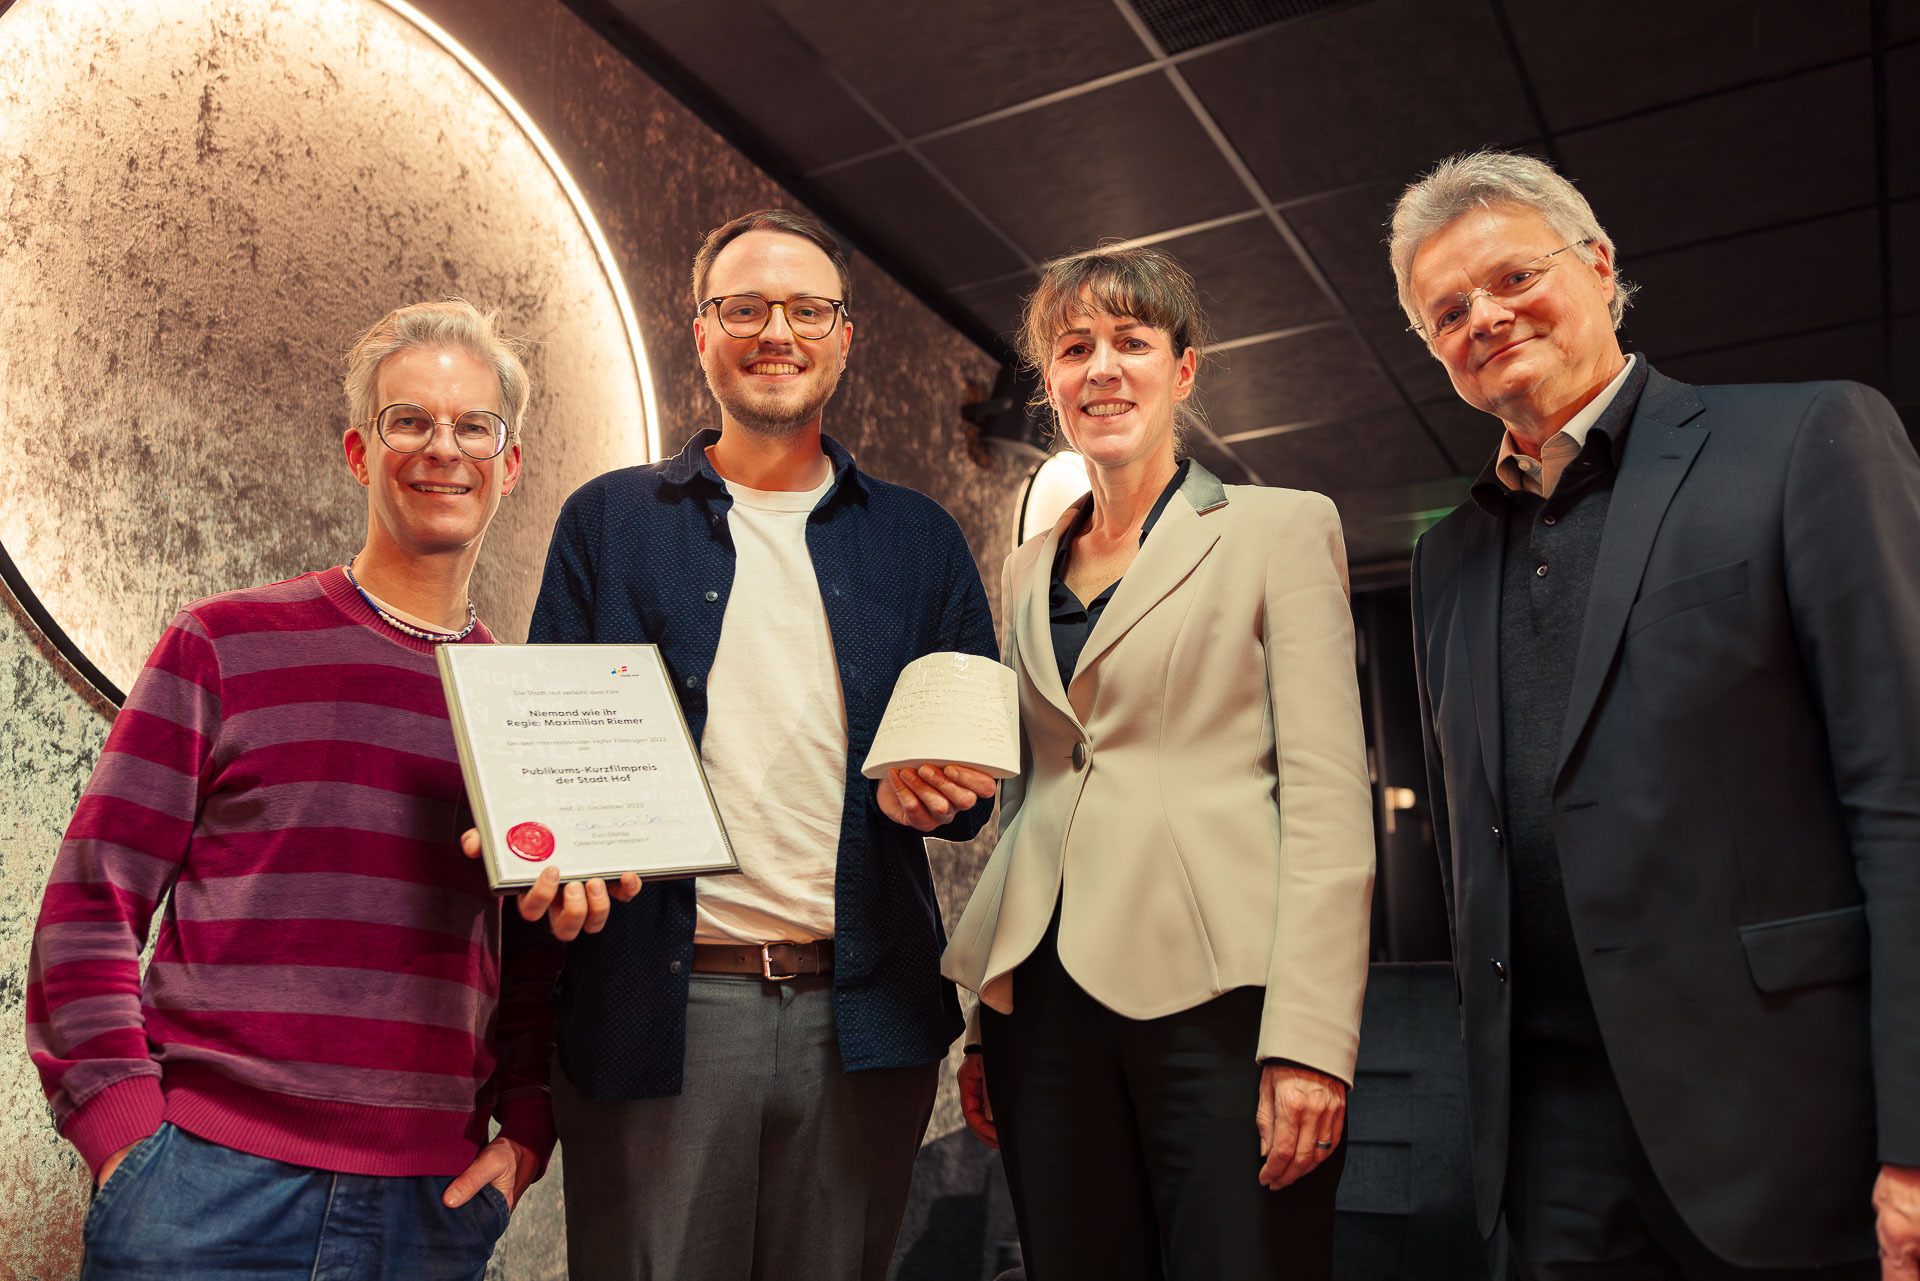 Eva Döhla, Mayor of the City of Hof and Head of the Cultural Office Peter Nürmberger present the Audience Short Film Award to Max Riemer for NO ONE LIKE YOU